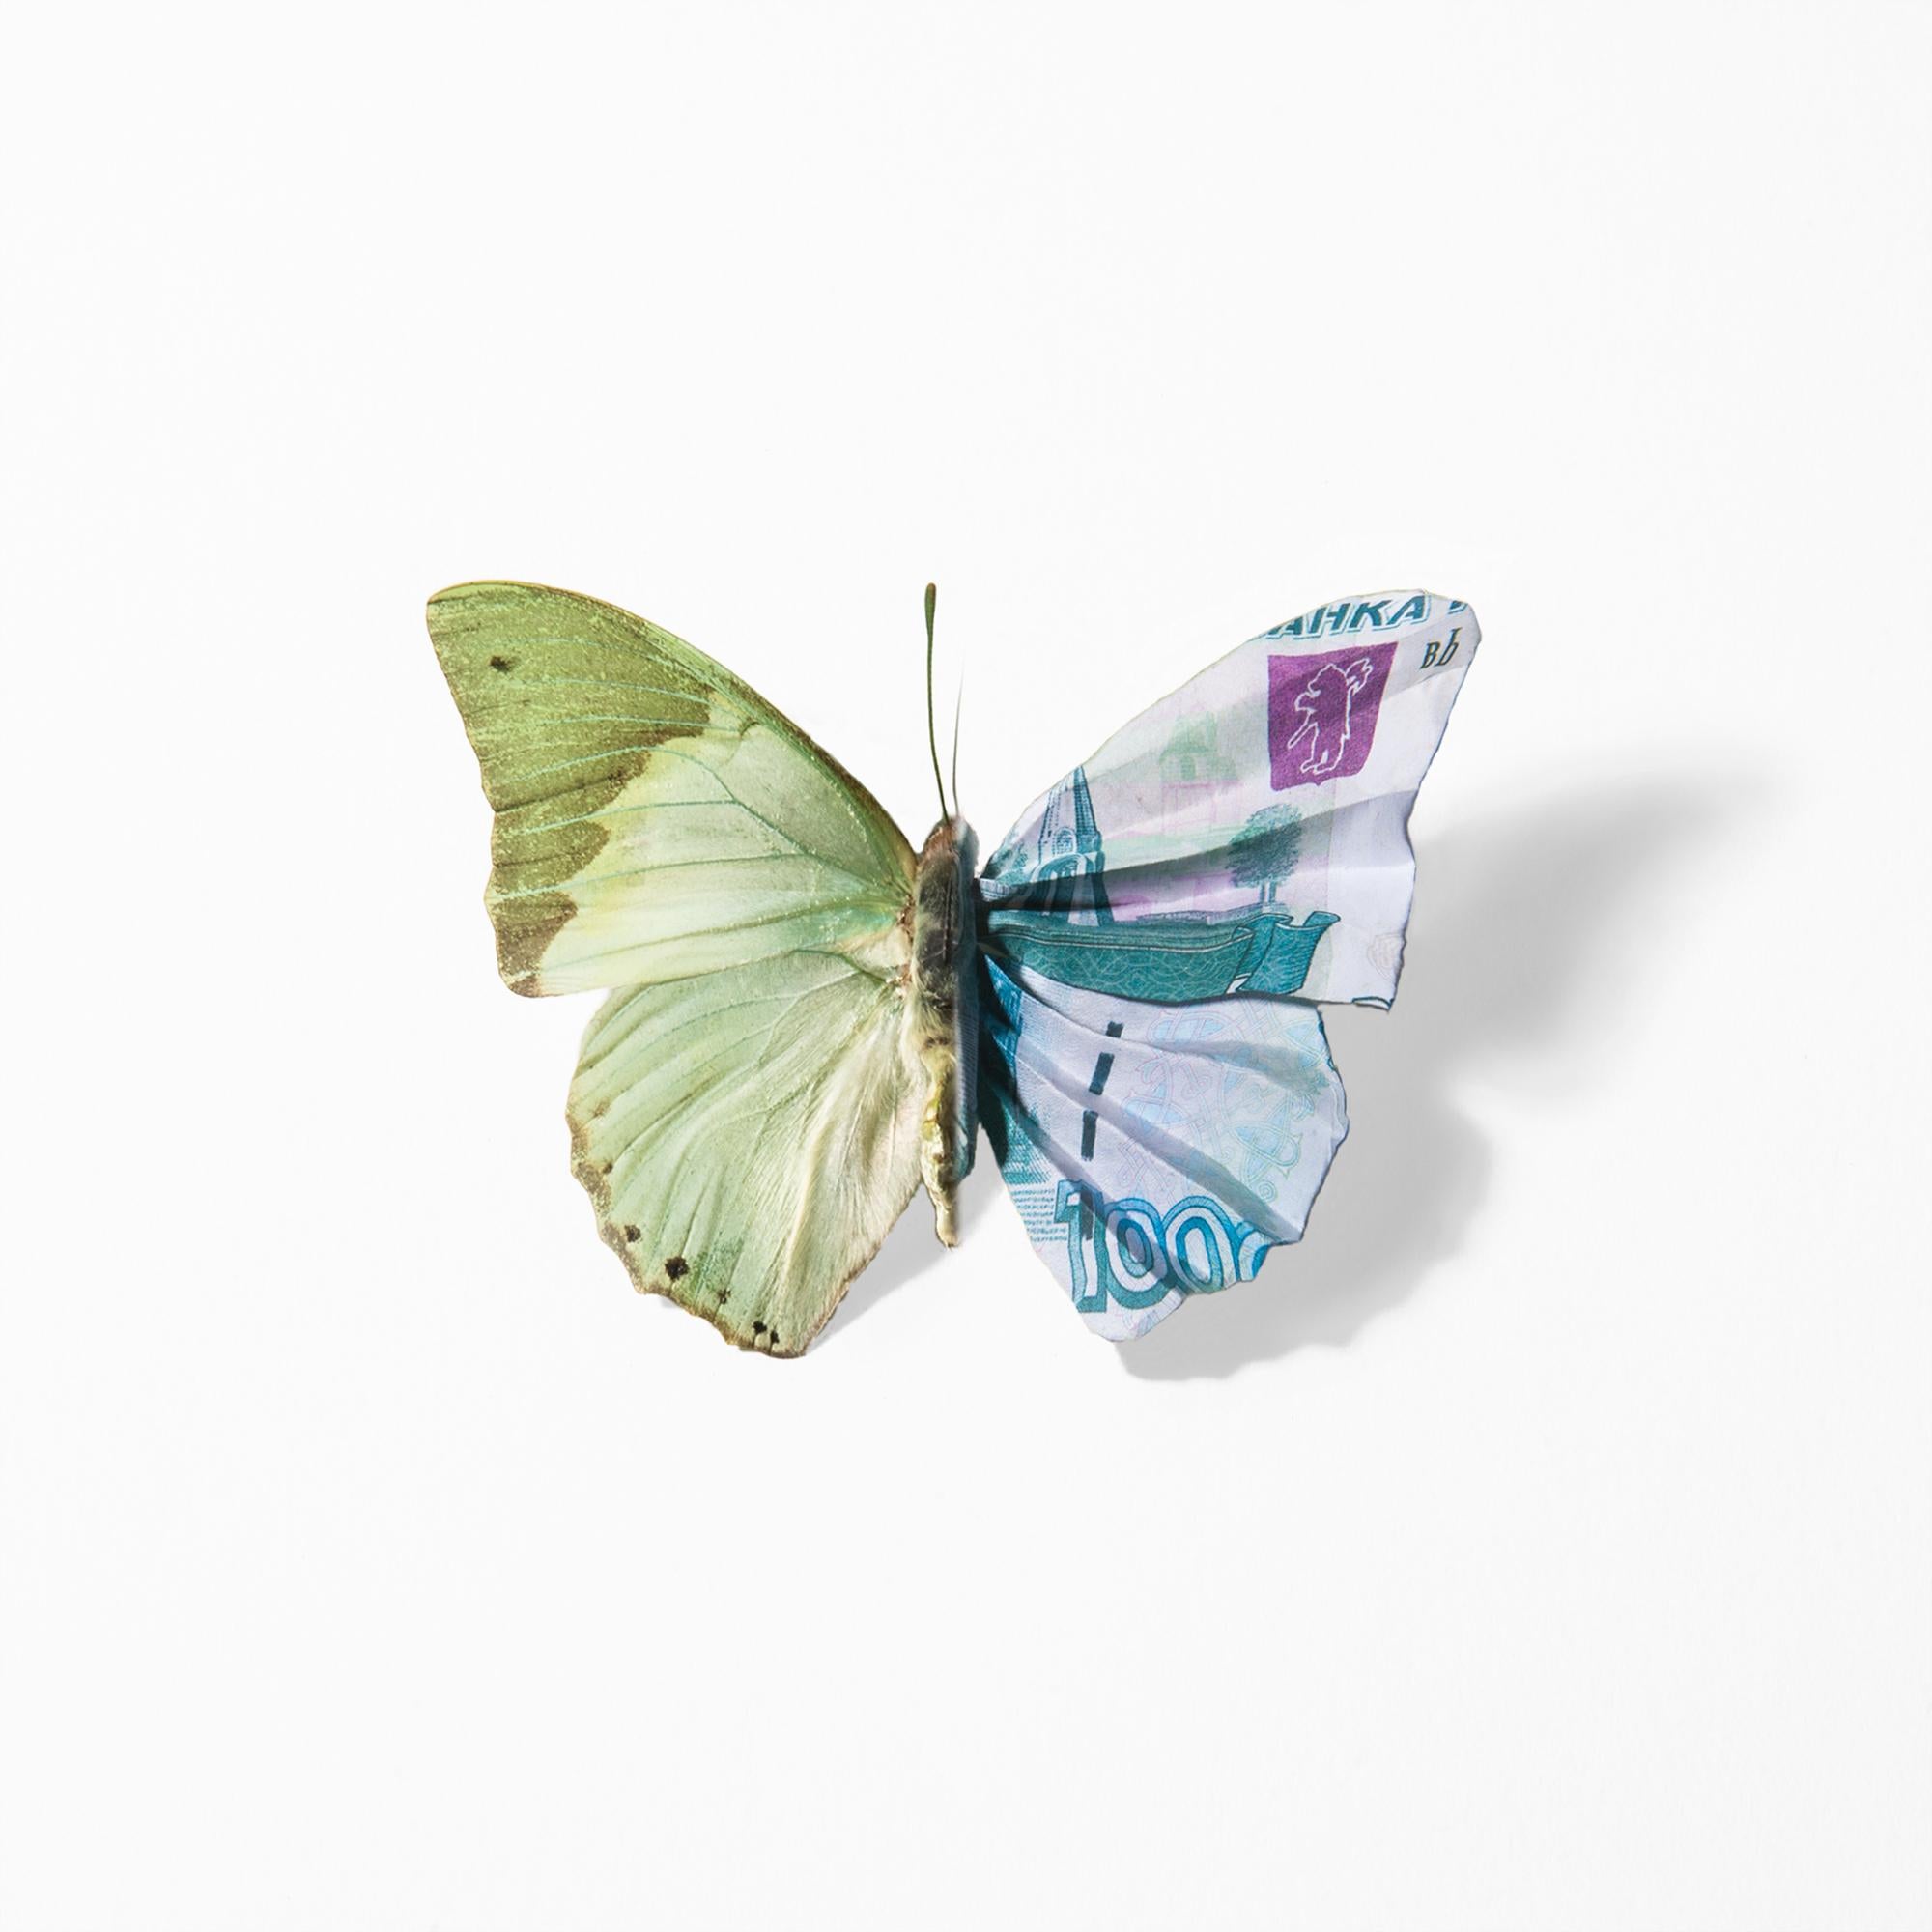 "A Thing of Beauty #7 (Charaxes)" Lenticular transition Butterfly to Currency